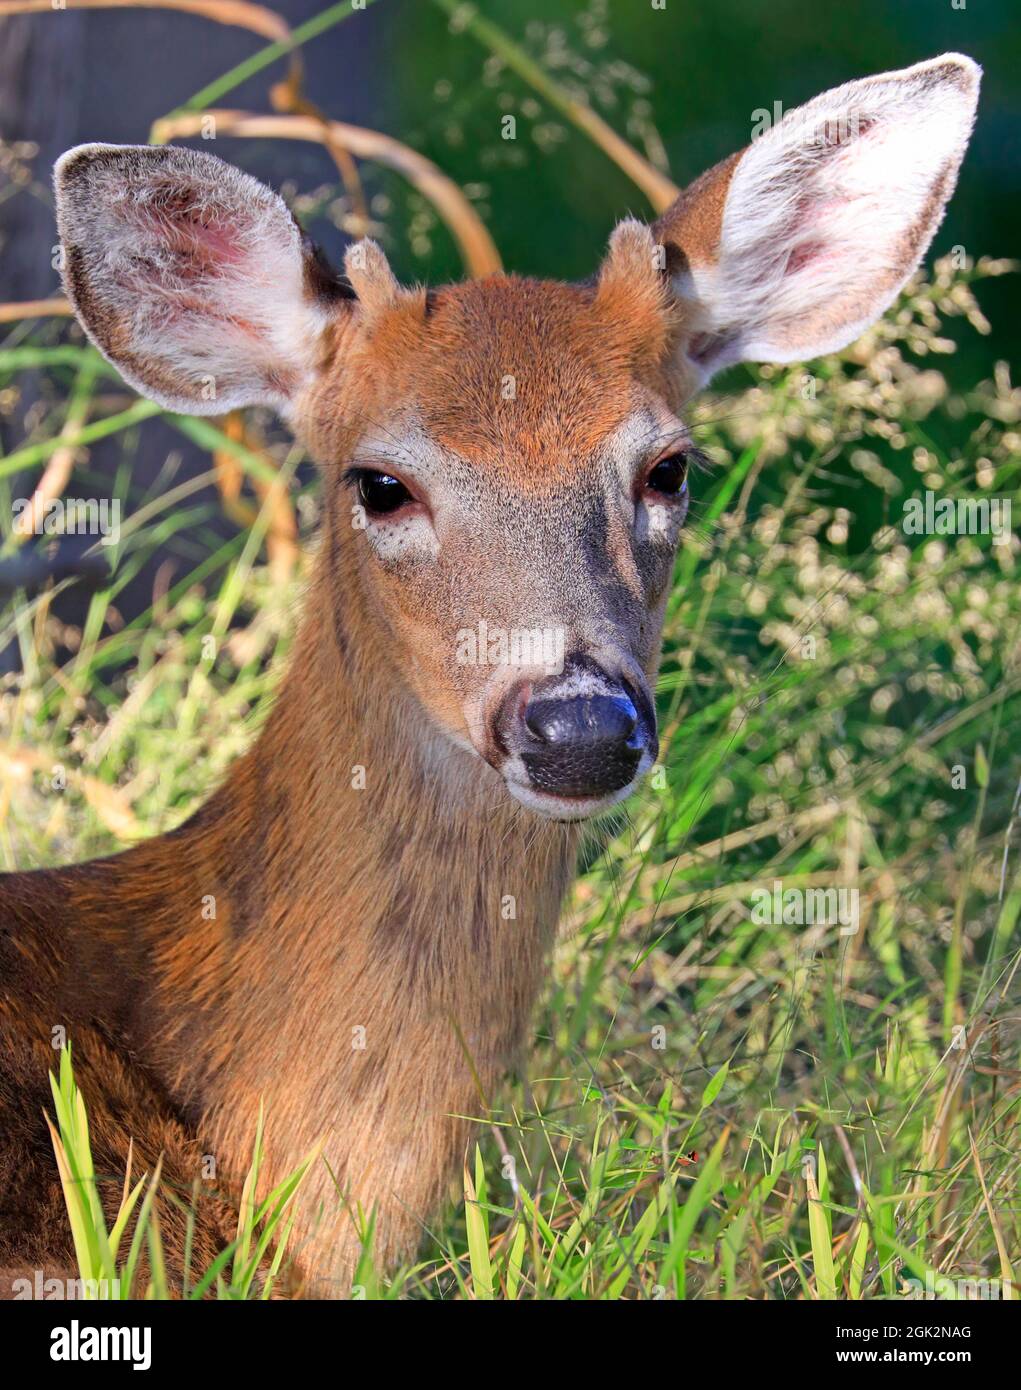 Young male deer portrait into the grass, Quebec, Canada Stock Photo